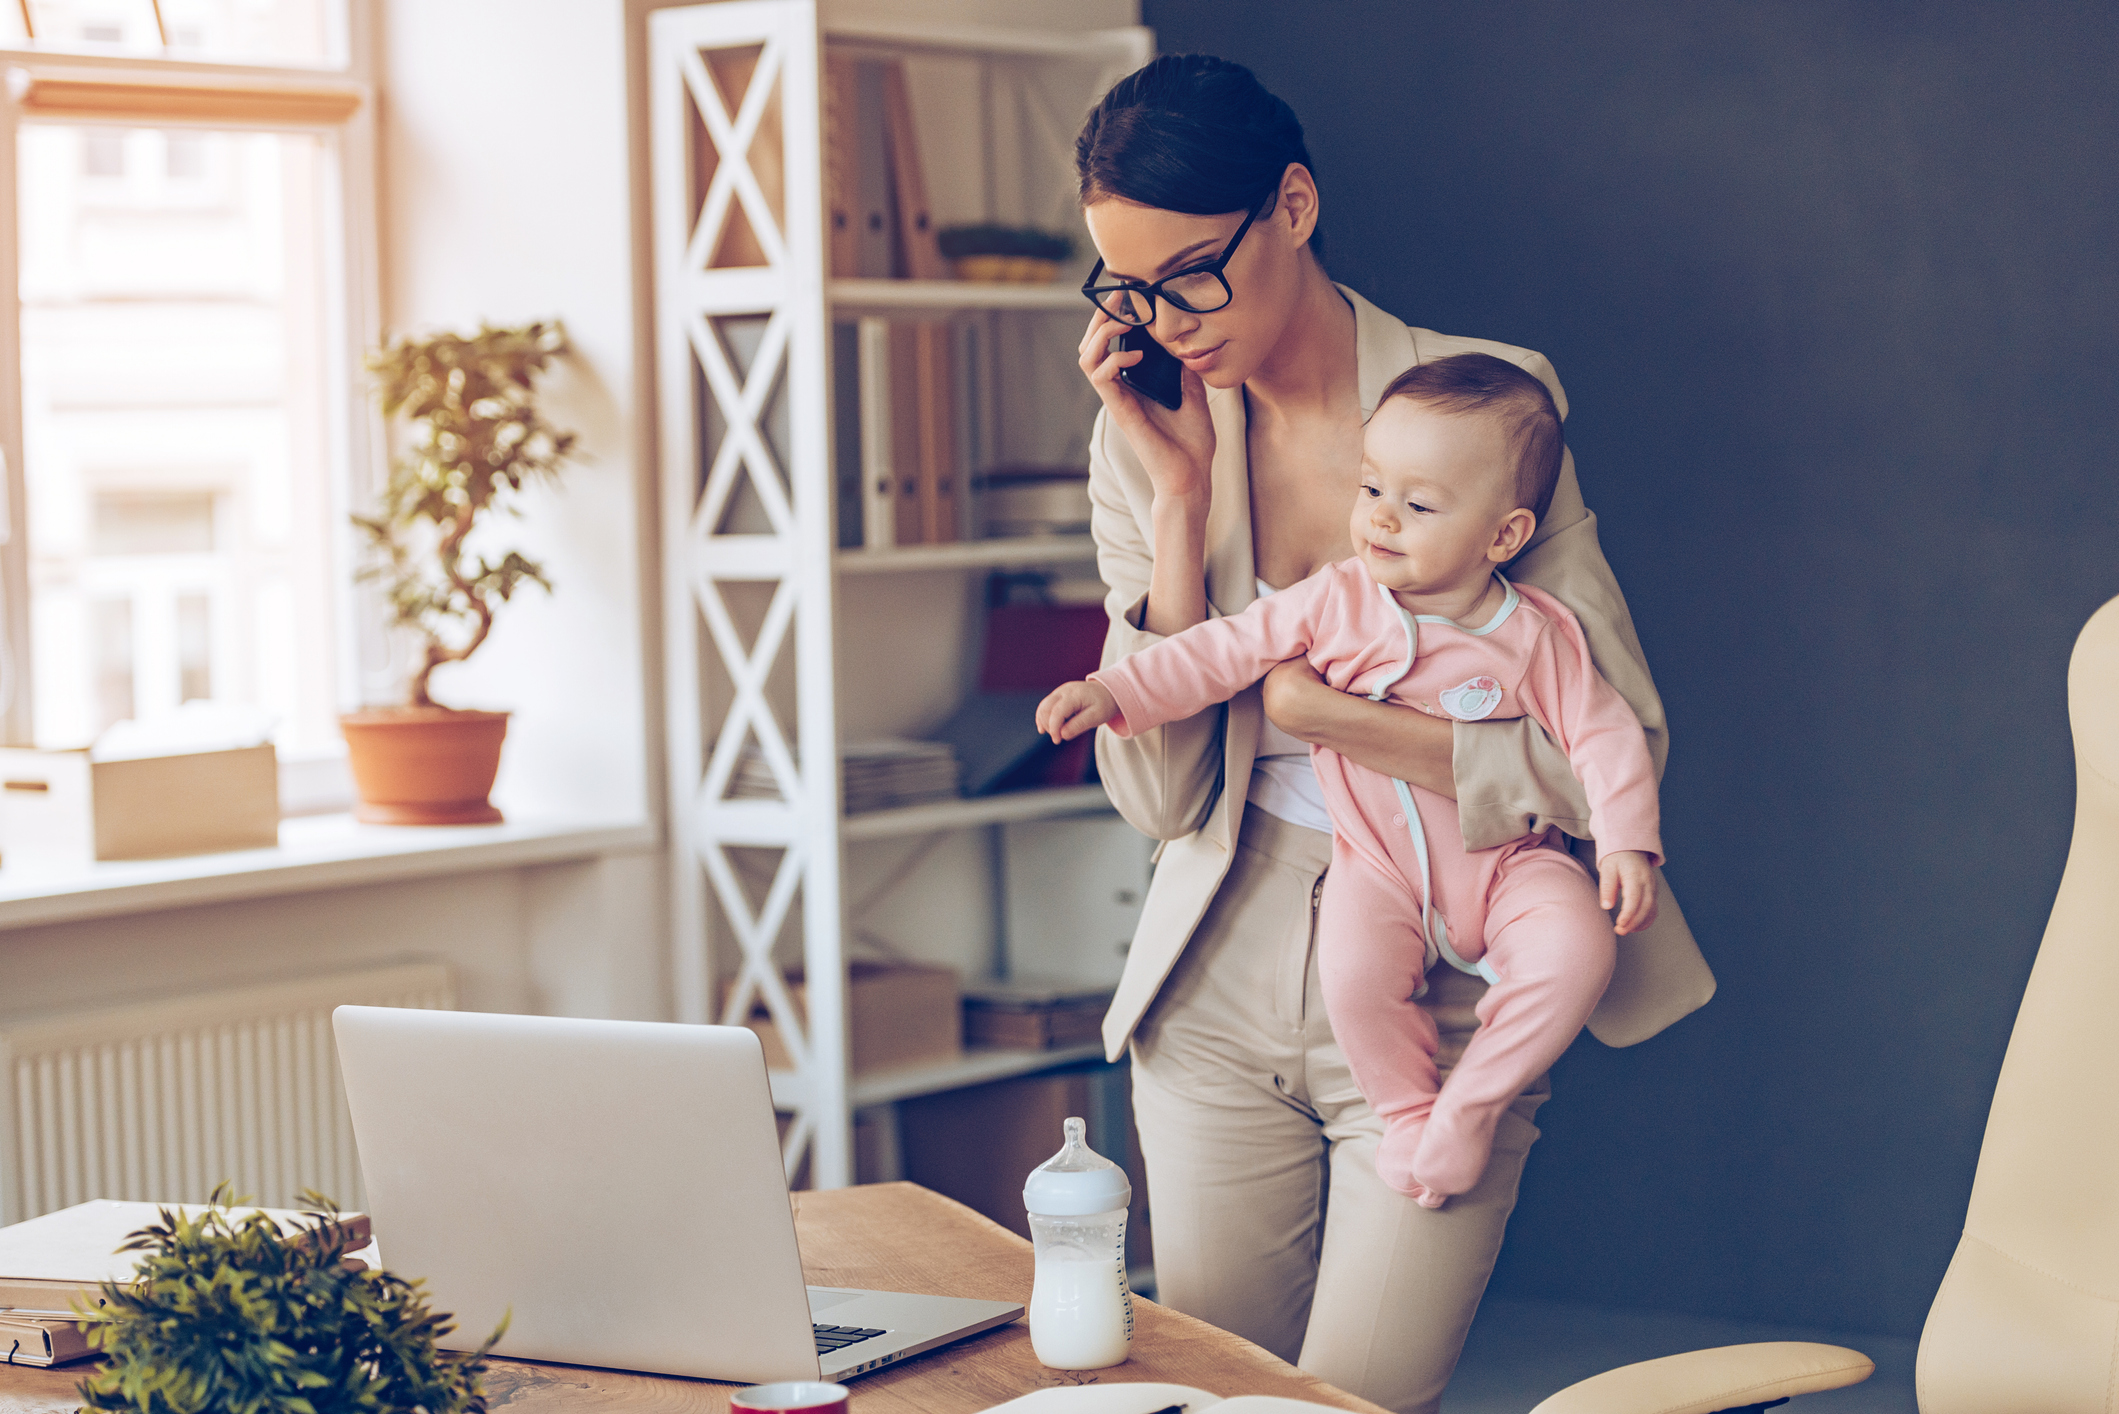 A working mother talking on a cell phone while looking at a laptop and holding a baby.